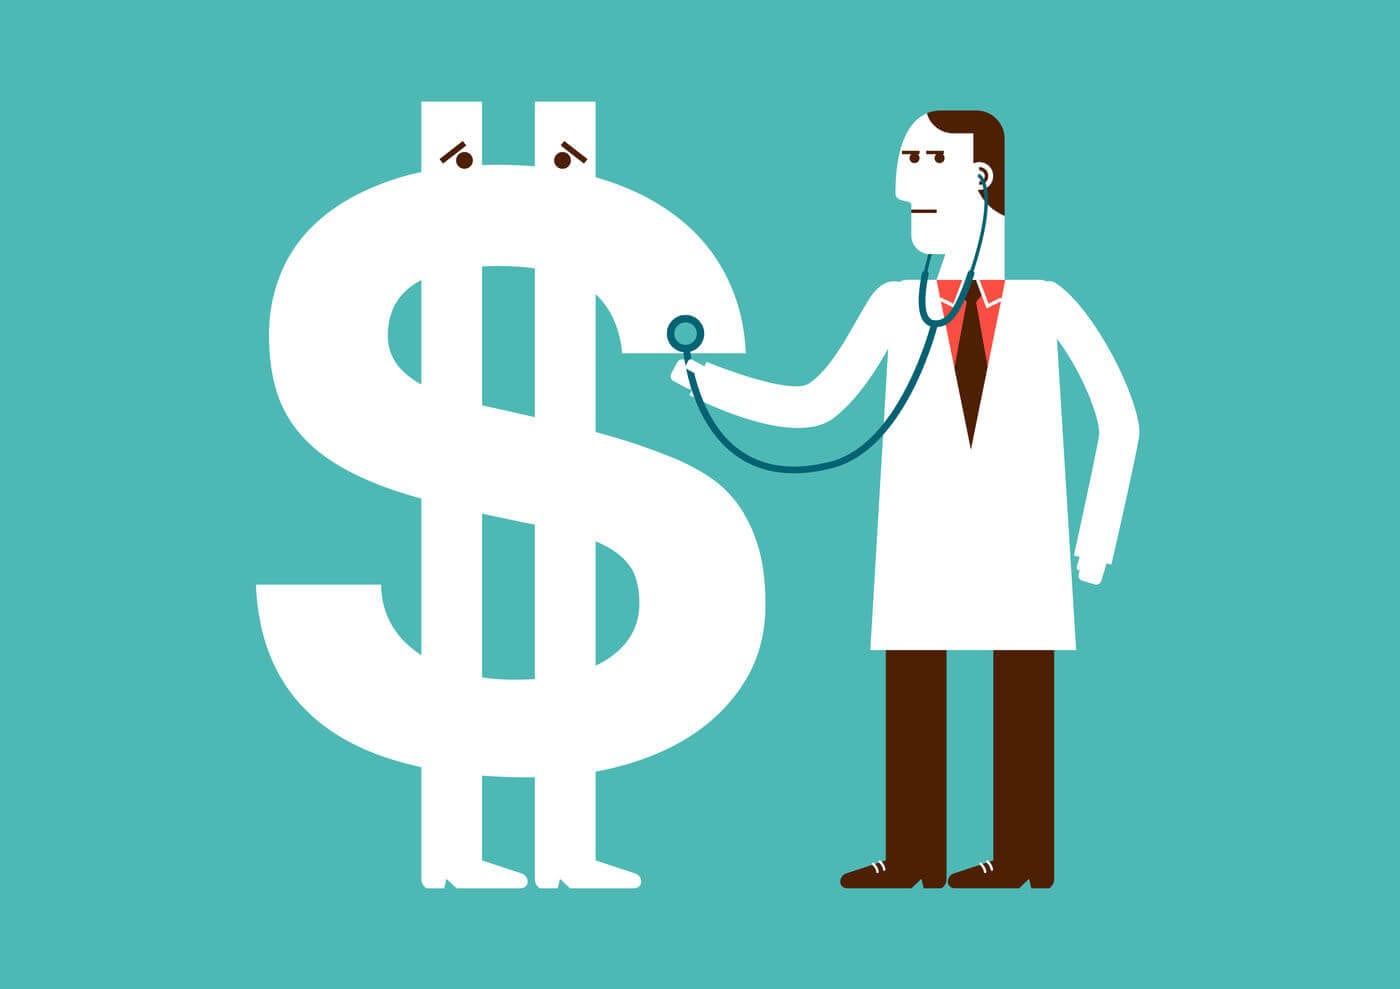 Does Chiropractic Cost Less and Why?